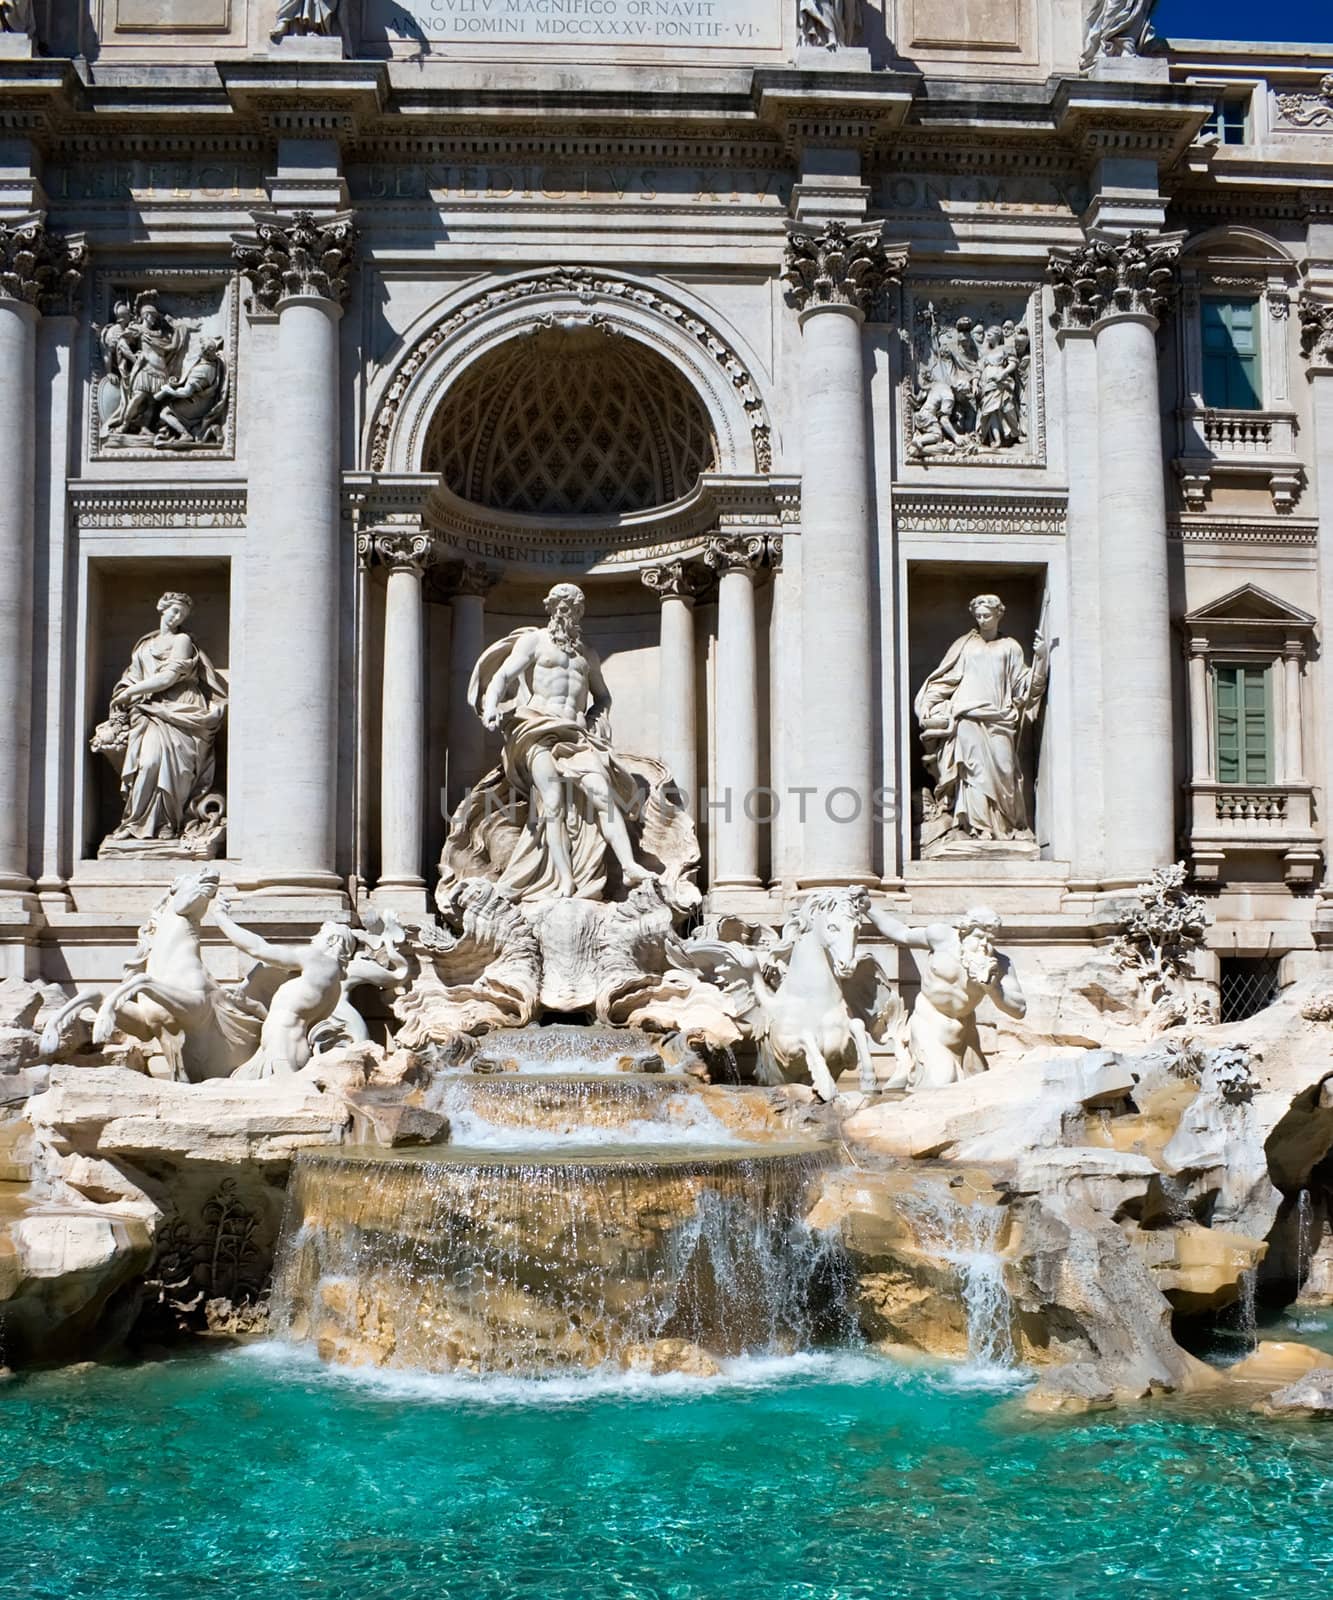 Famous sightseeing Trevi fountain in Rome, Italy